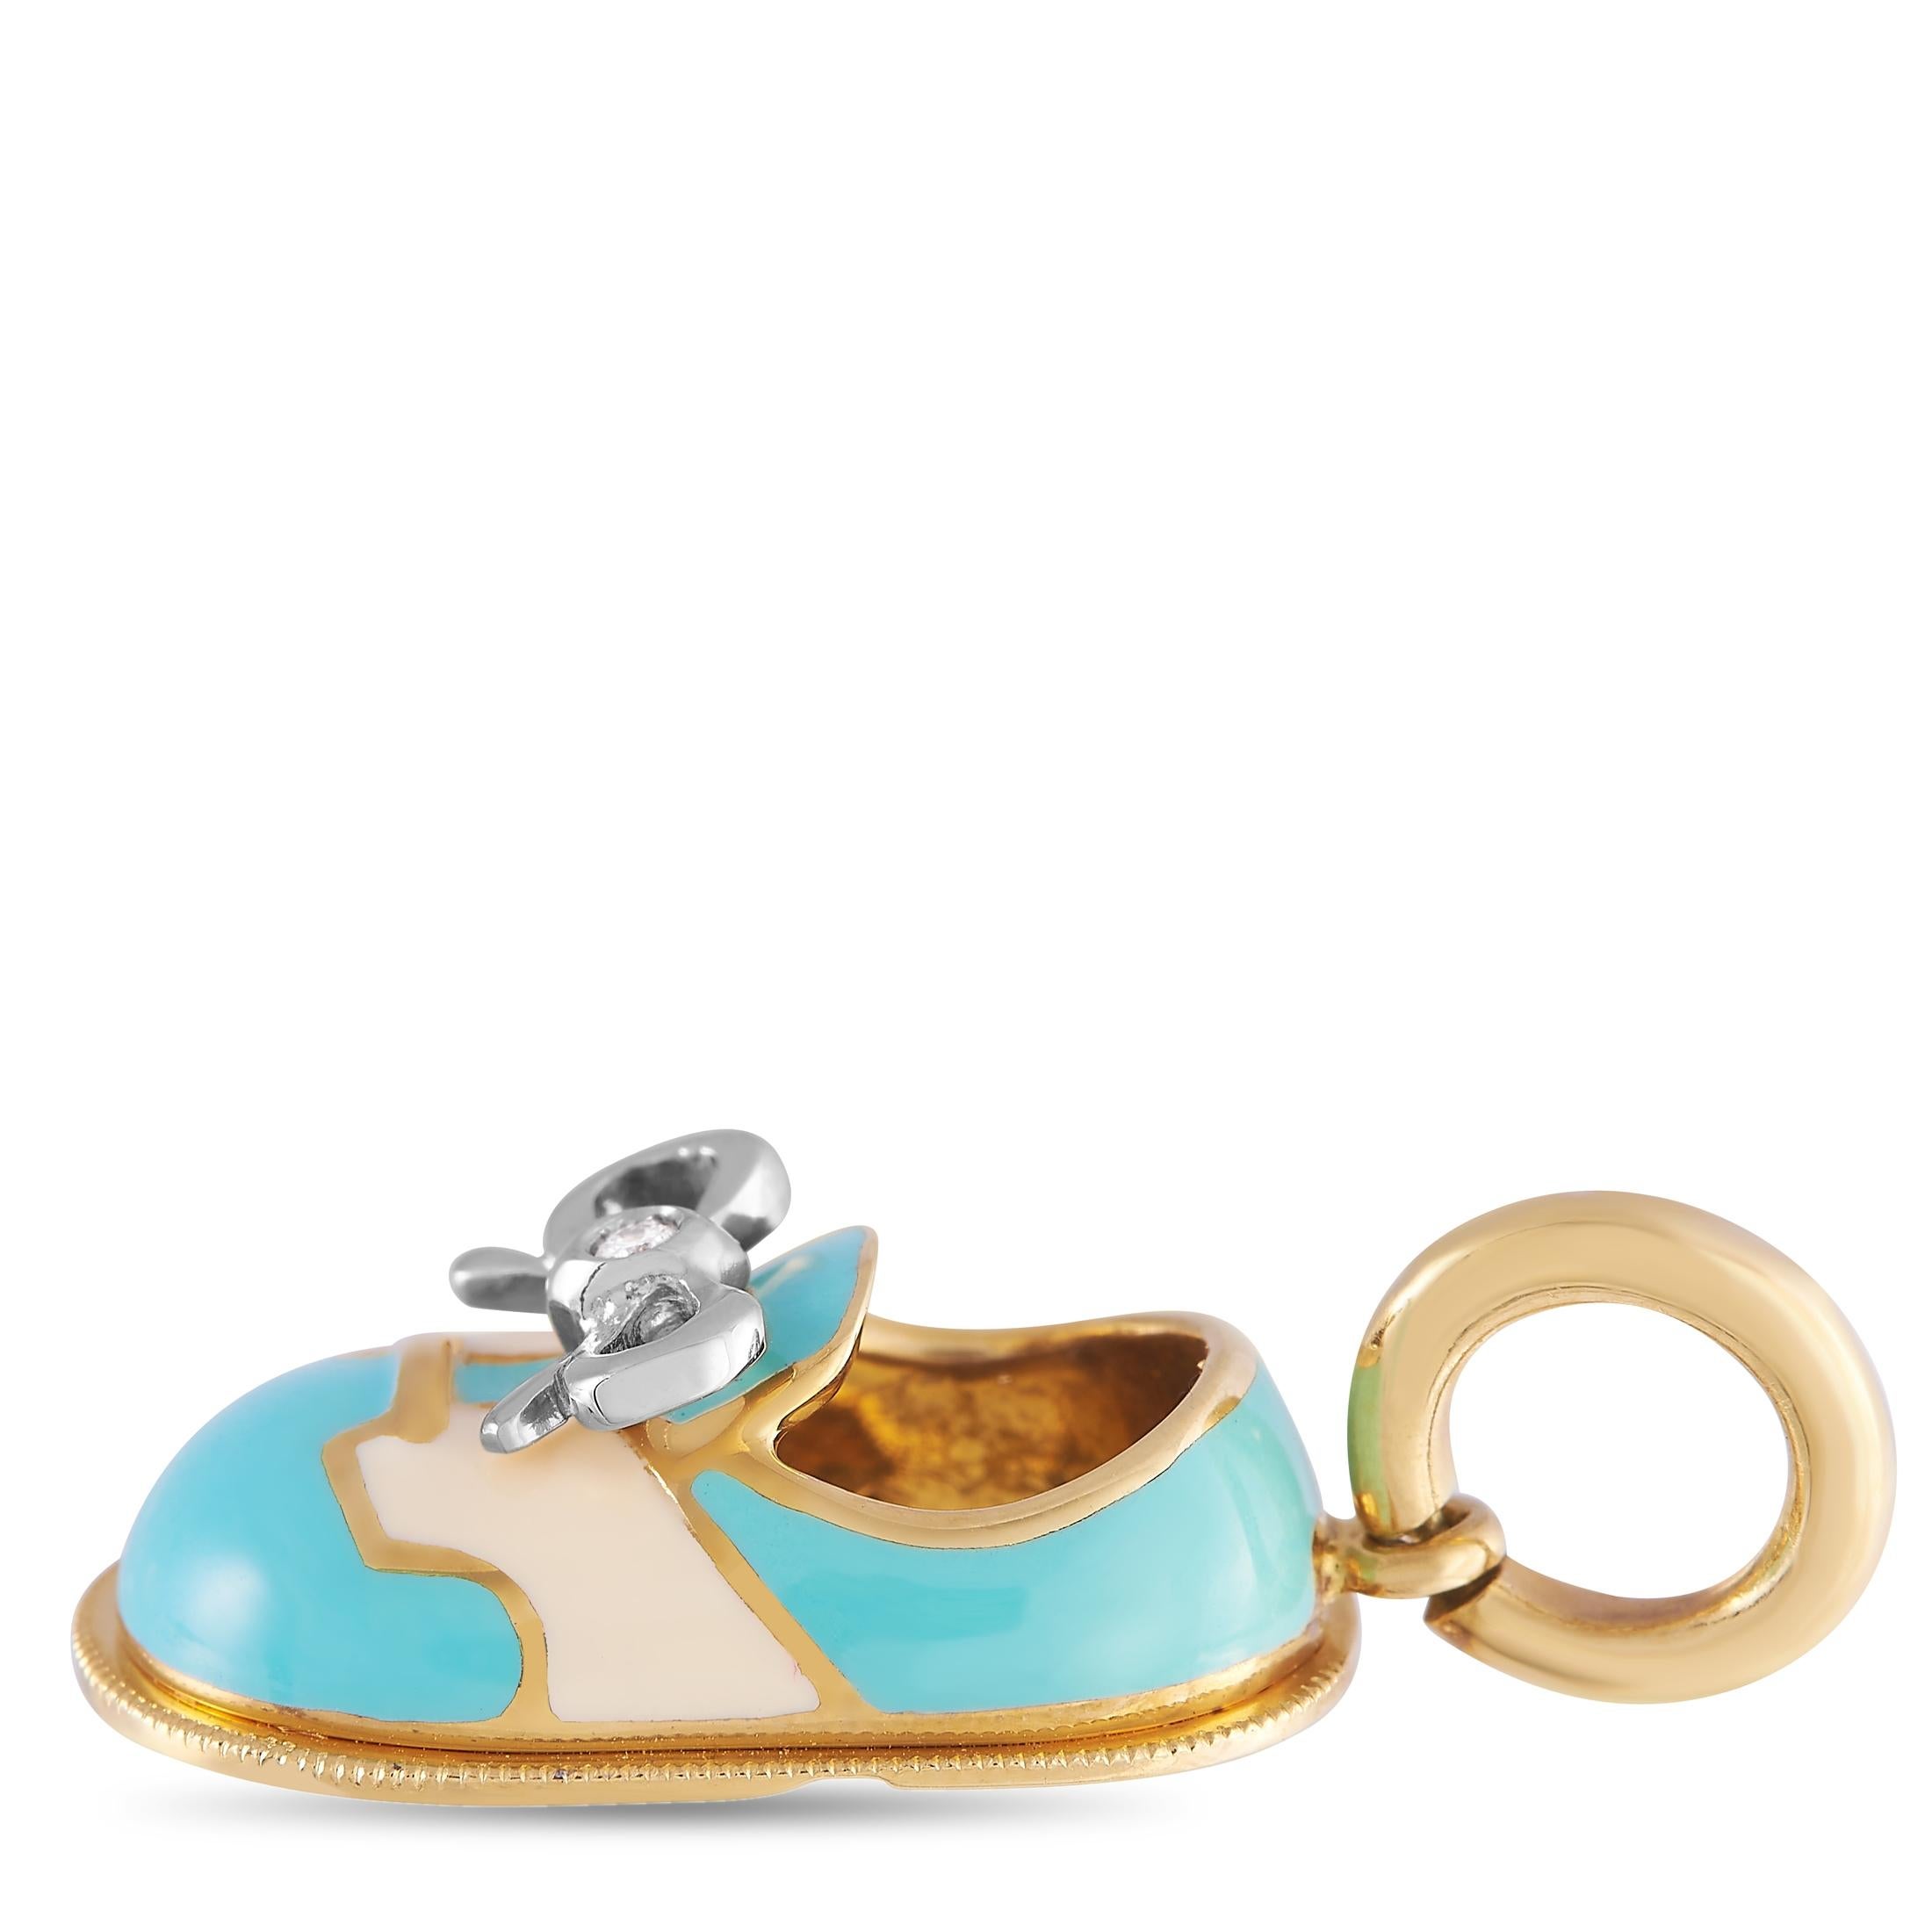 Celebrate a sweet milestone with the help of this opulent Aaron Basha pendant. Shaped like a baby shoe, this piece measures 1” long and is accented by charming blue and ivory enamel. It’s made from lustrous 18K Yellow Gold and can be attached to any